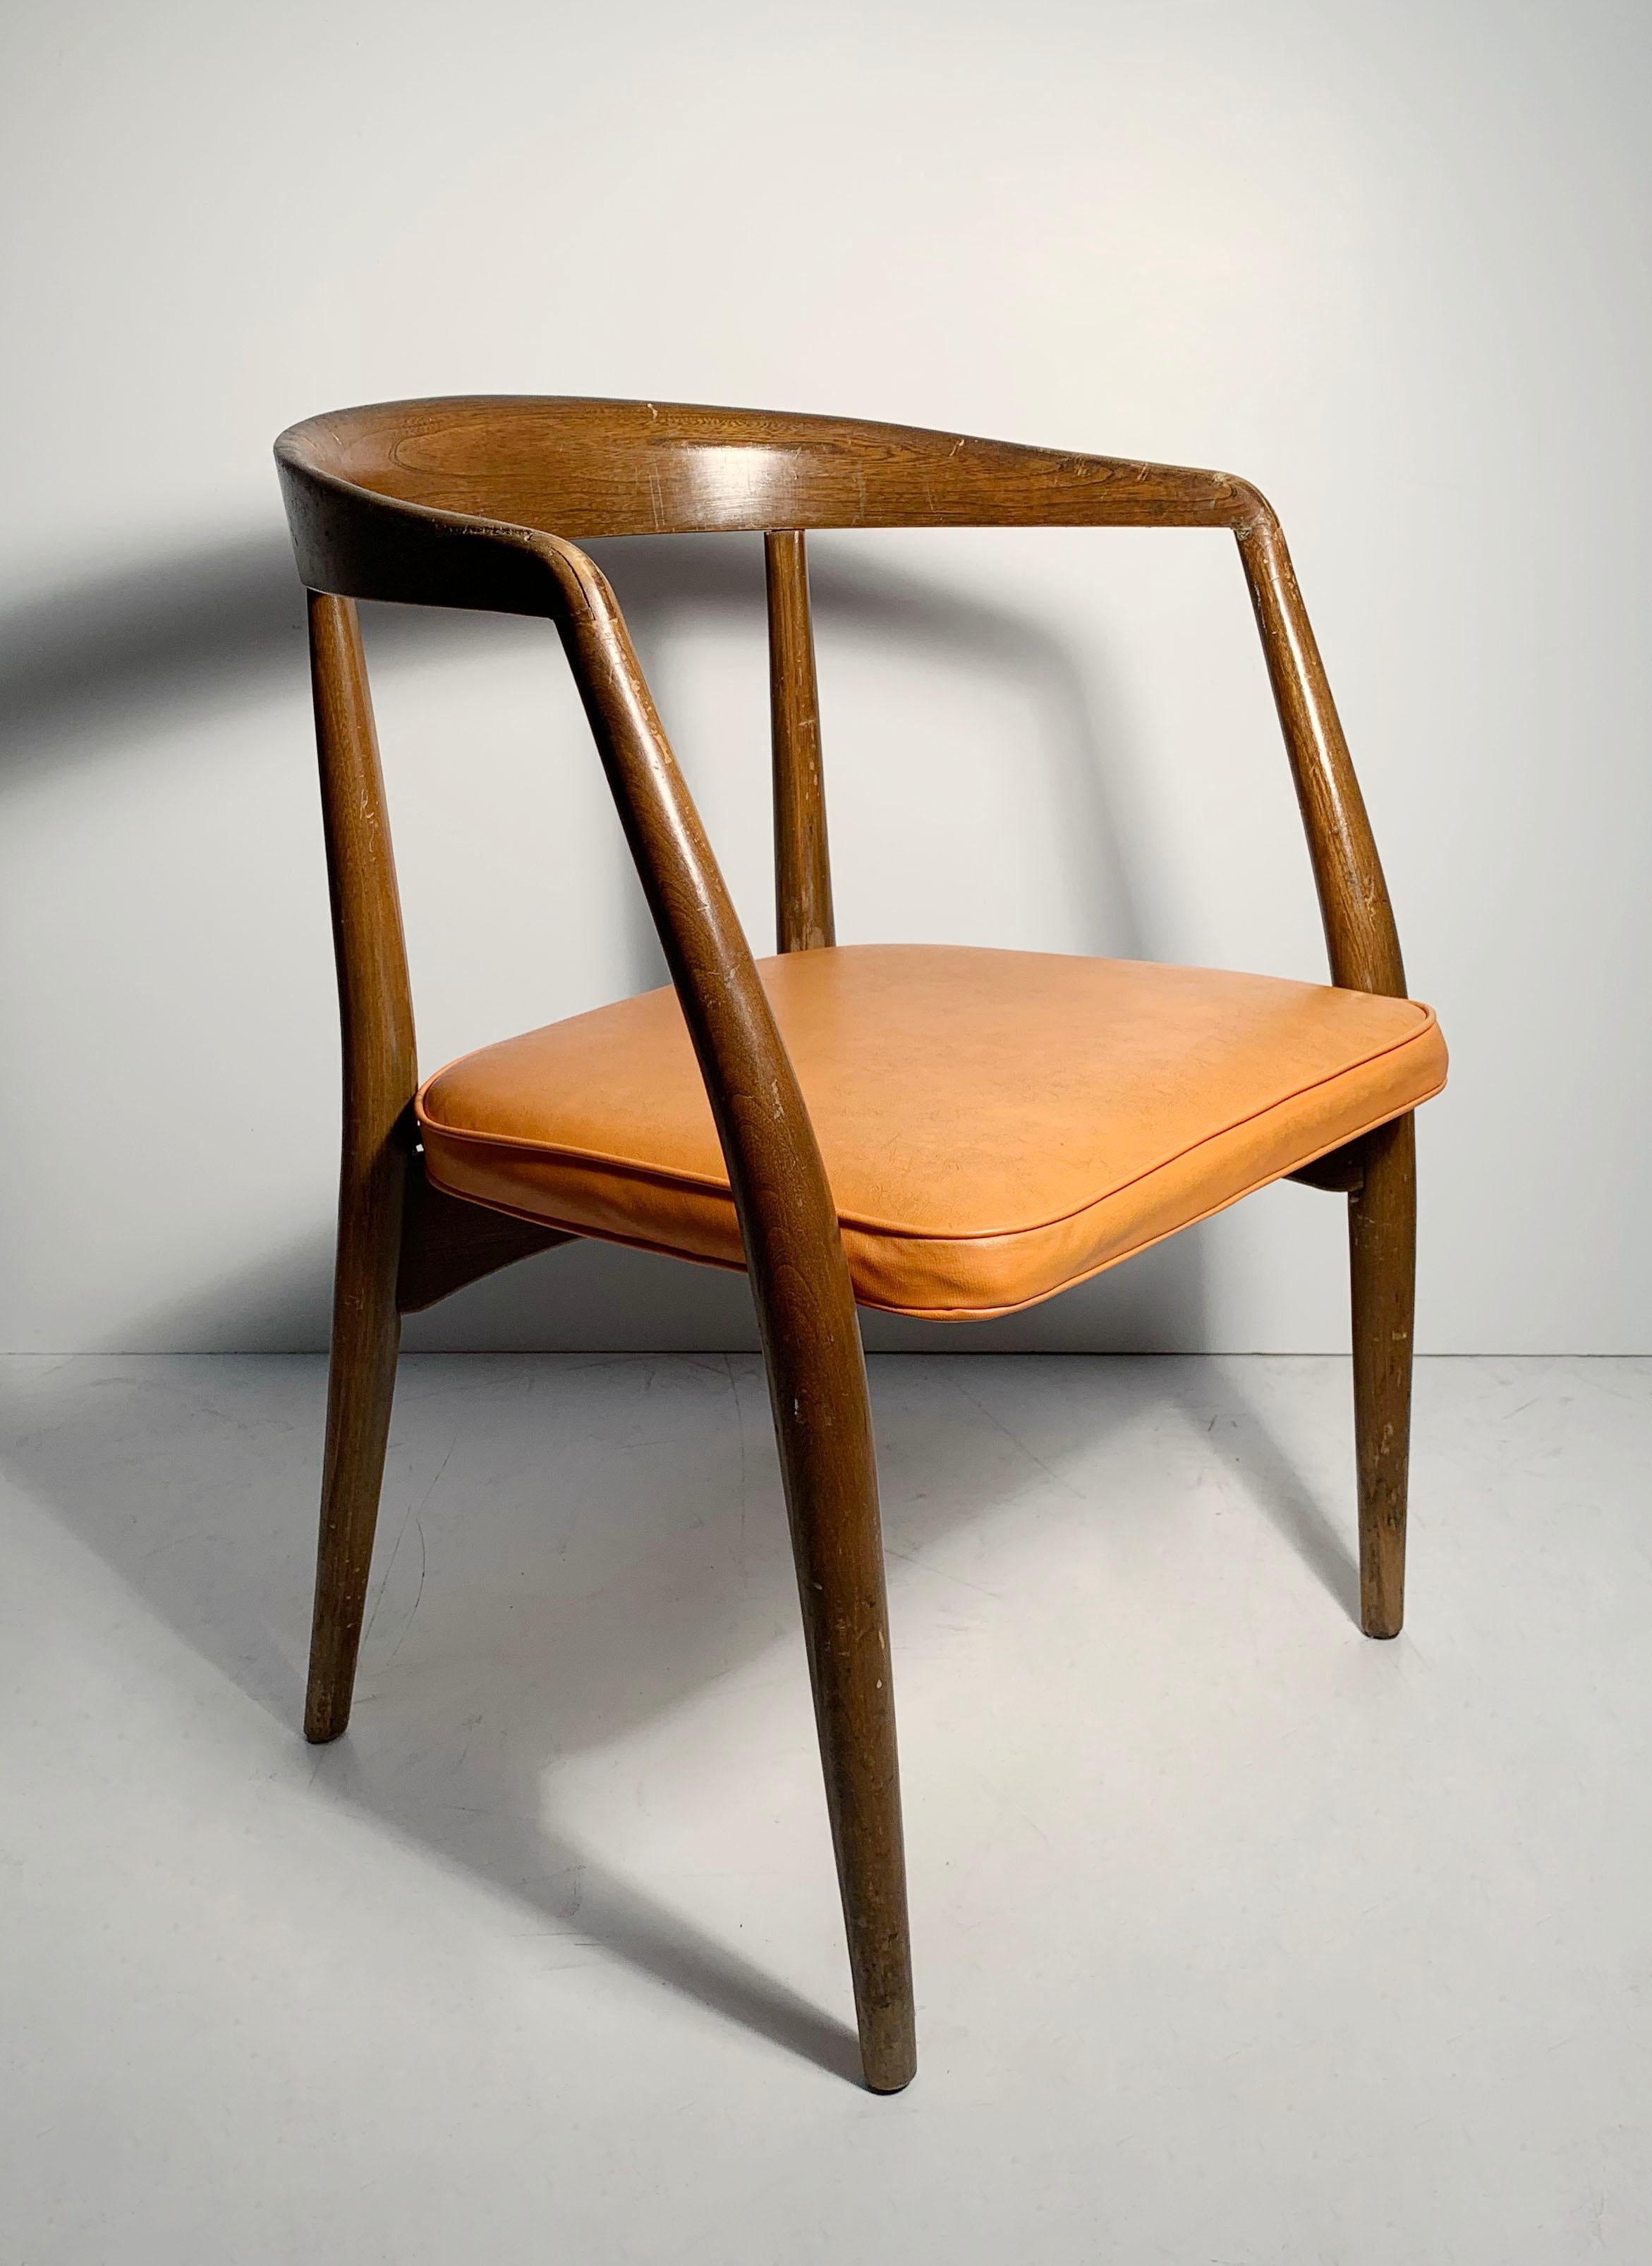 lawrence peabody chair